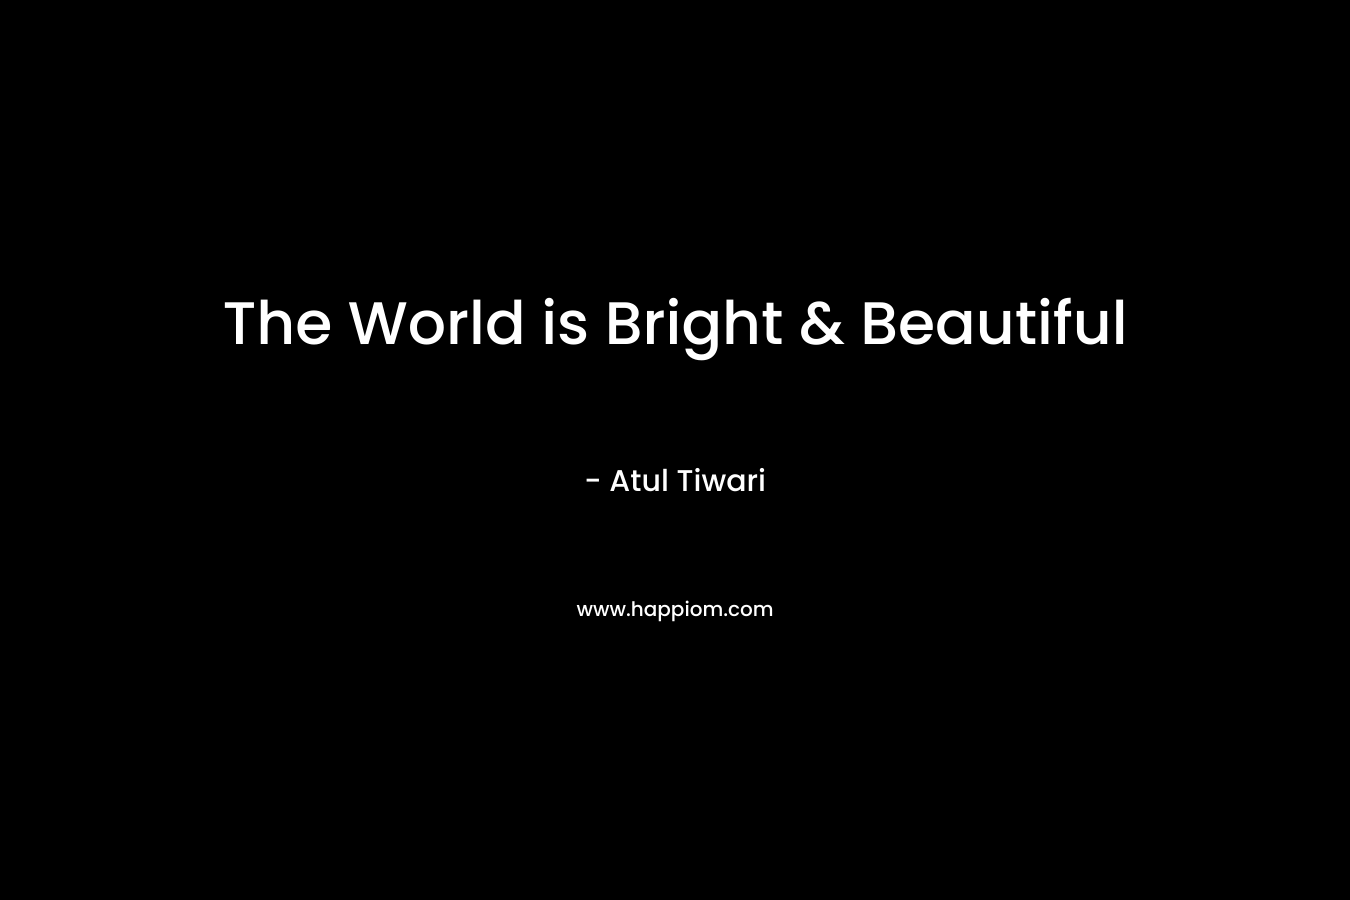 The World is Bright & Beautiful